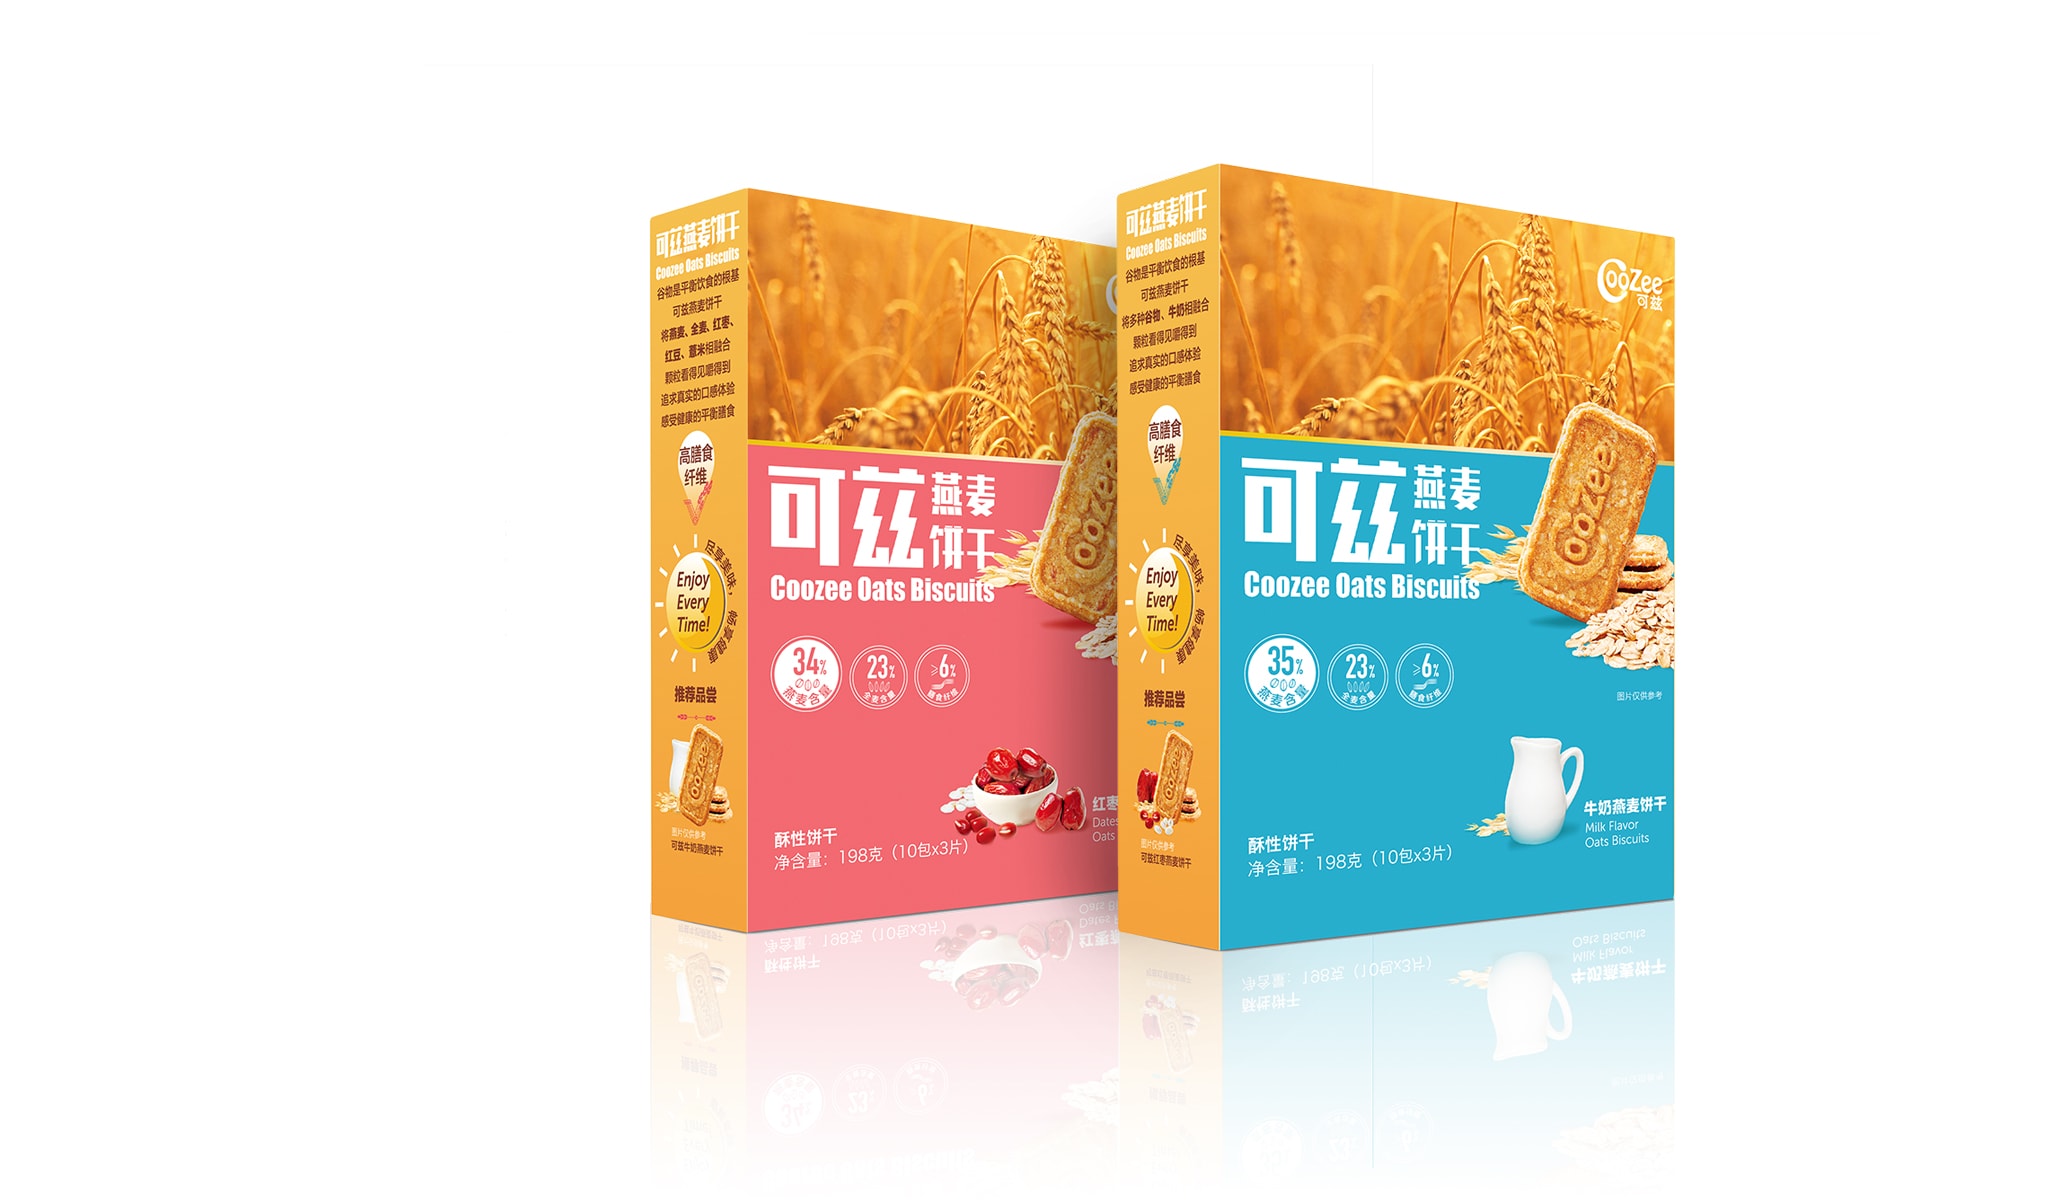 Coozee Biscuits Packaging Design